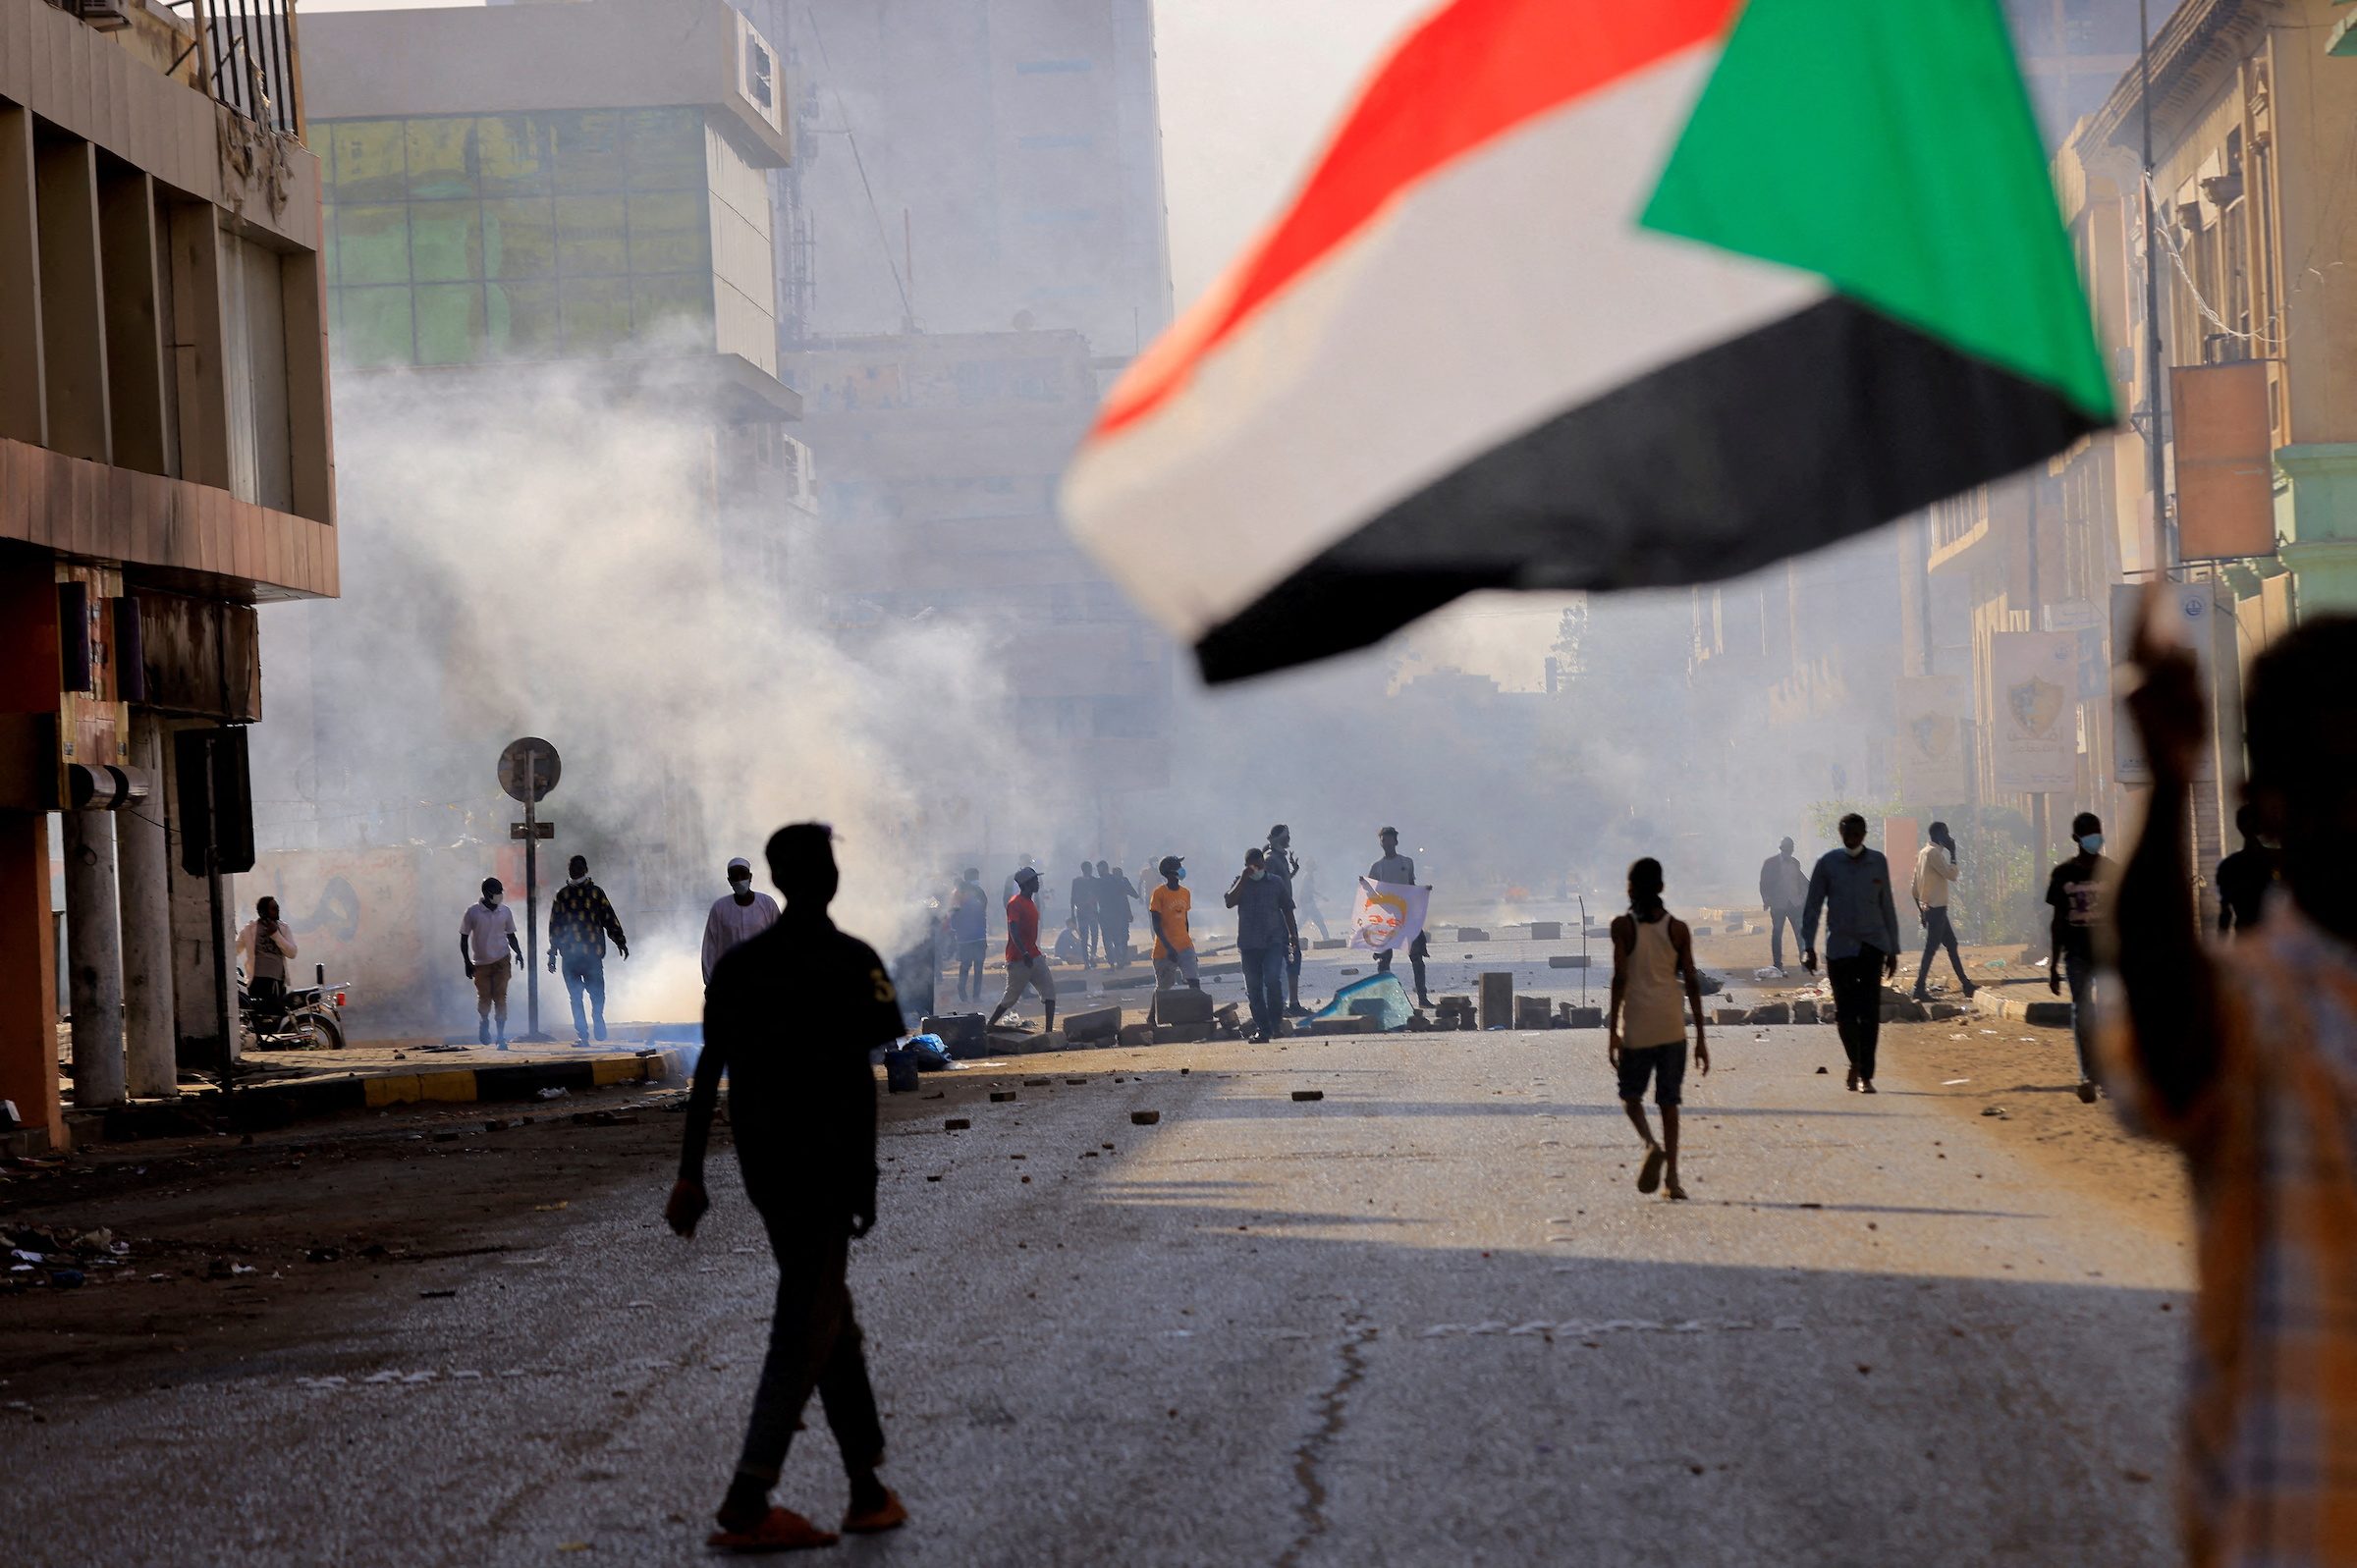 Internet services disrupted in Sudanese capital ahead of protests – Reuters witnesses